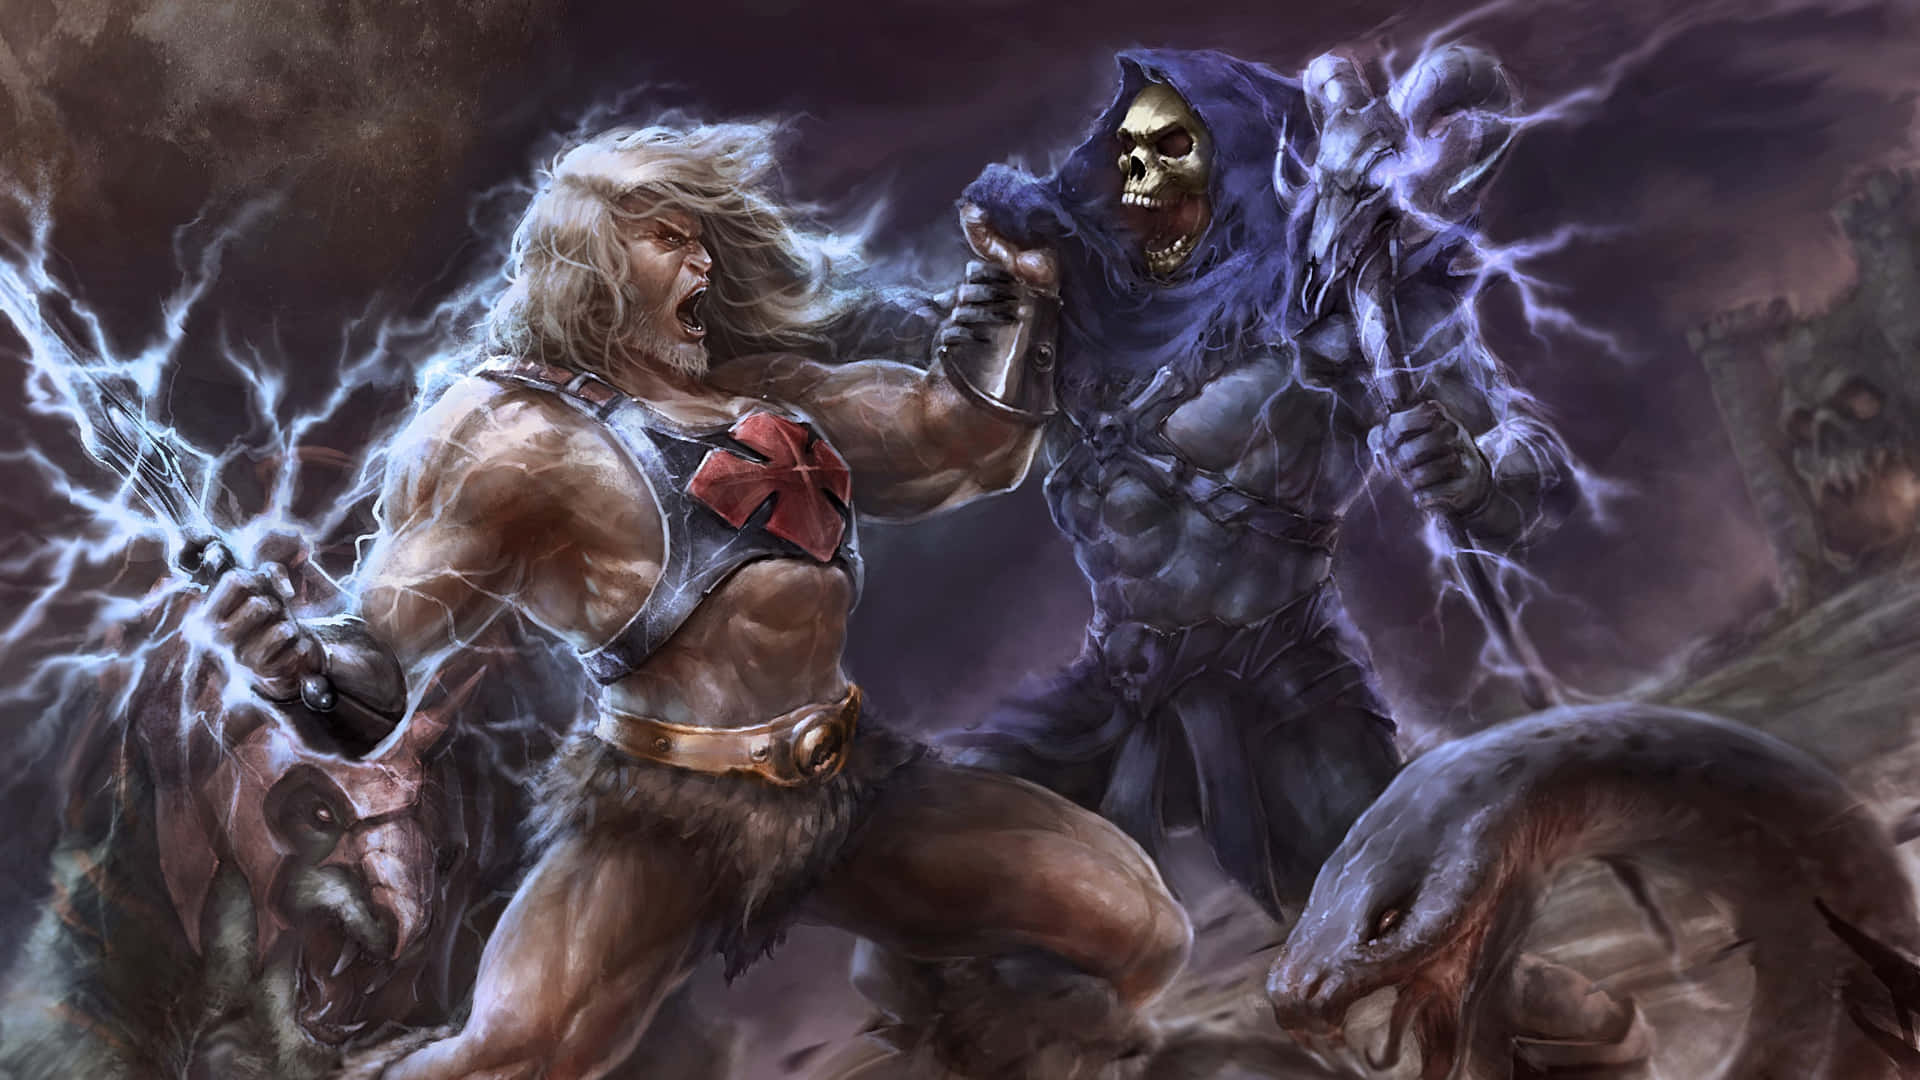 He-man And Skeleton Fighting In The Dark